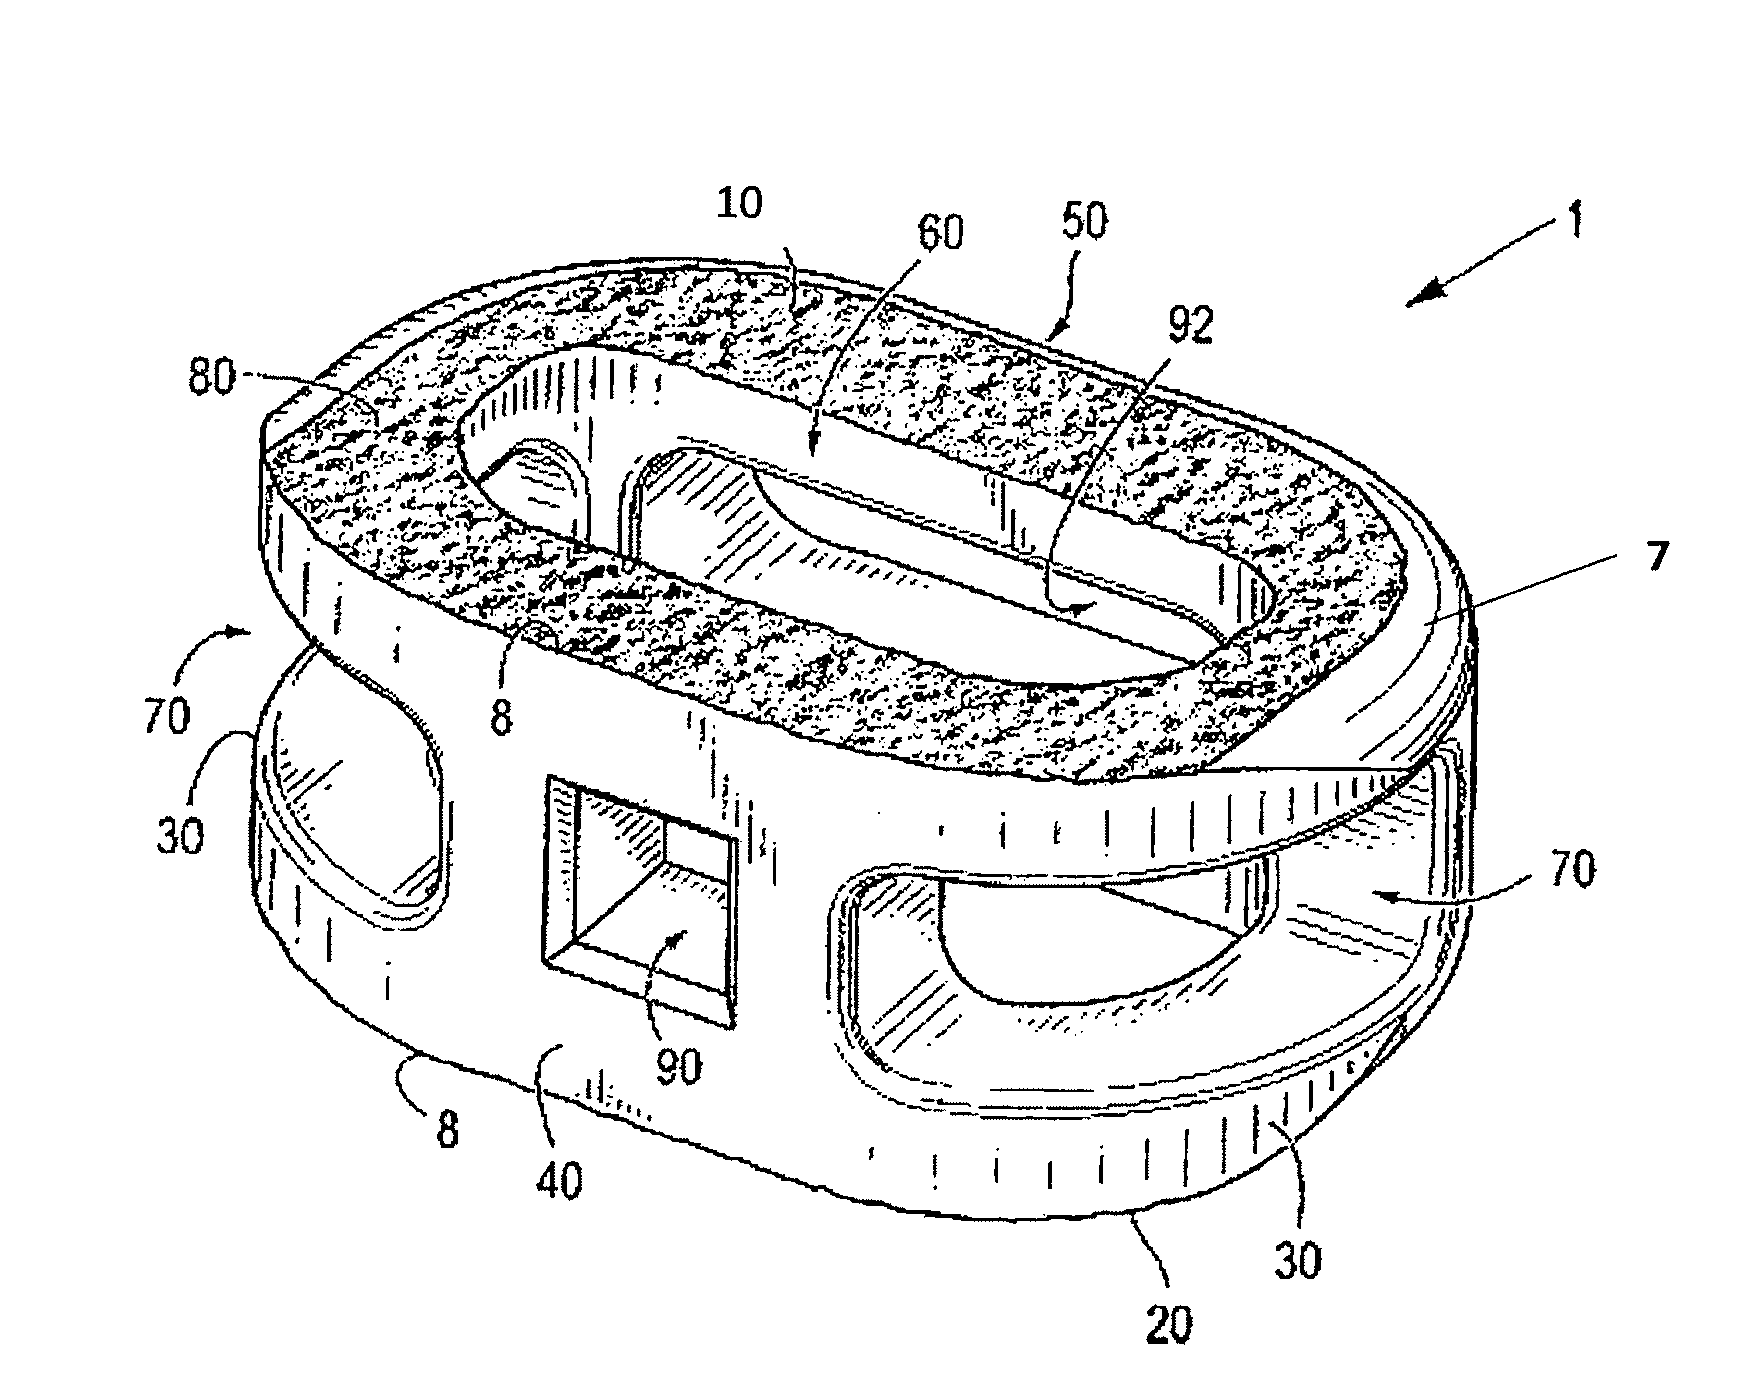 Methods for manufacturing implants having integration surfaces